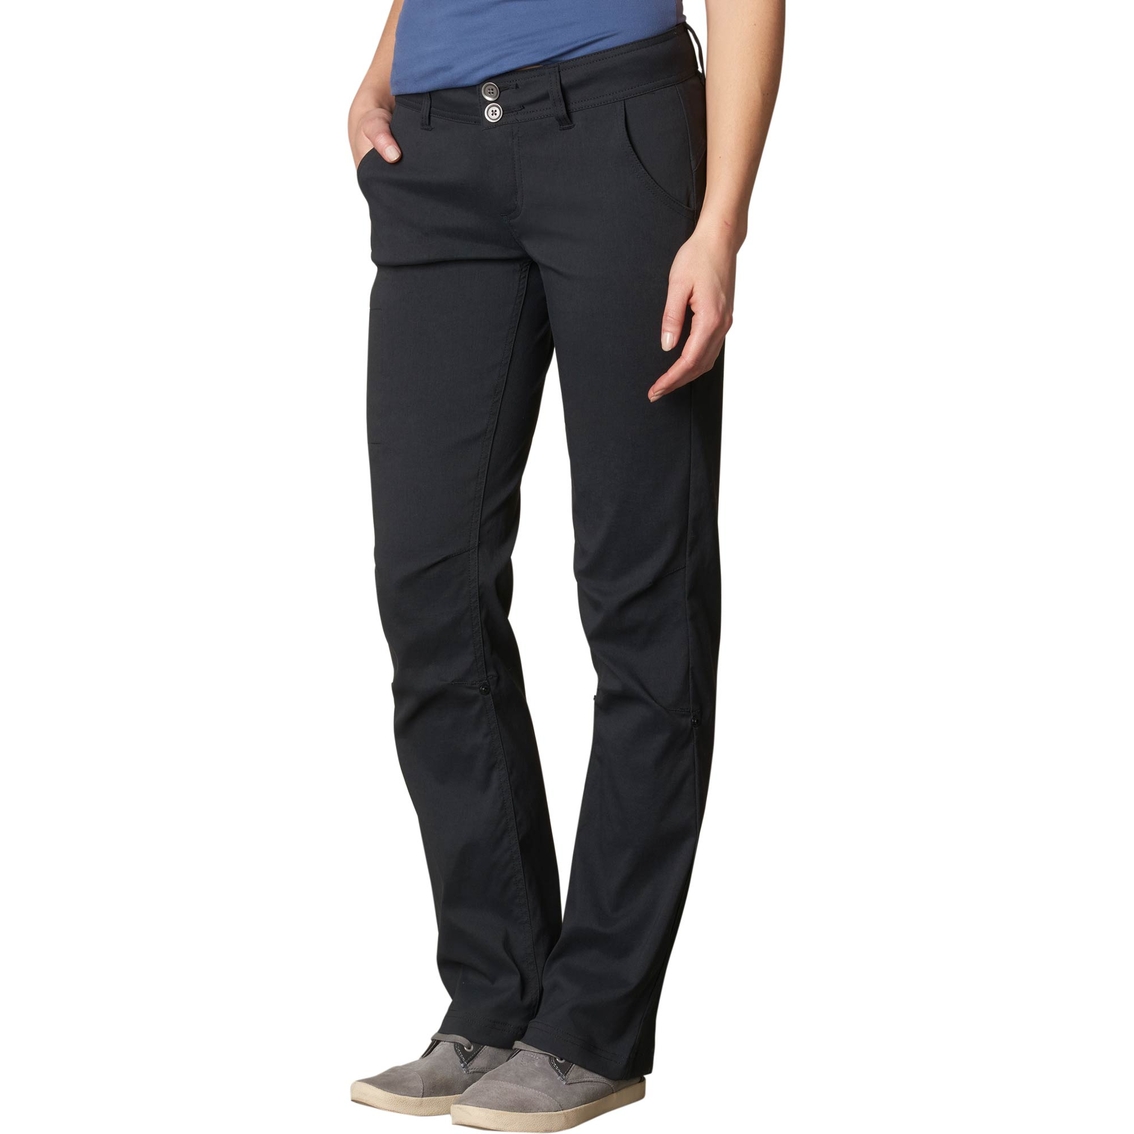 Prana Tall Halle Pants, Pants, Clothing & Accessories